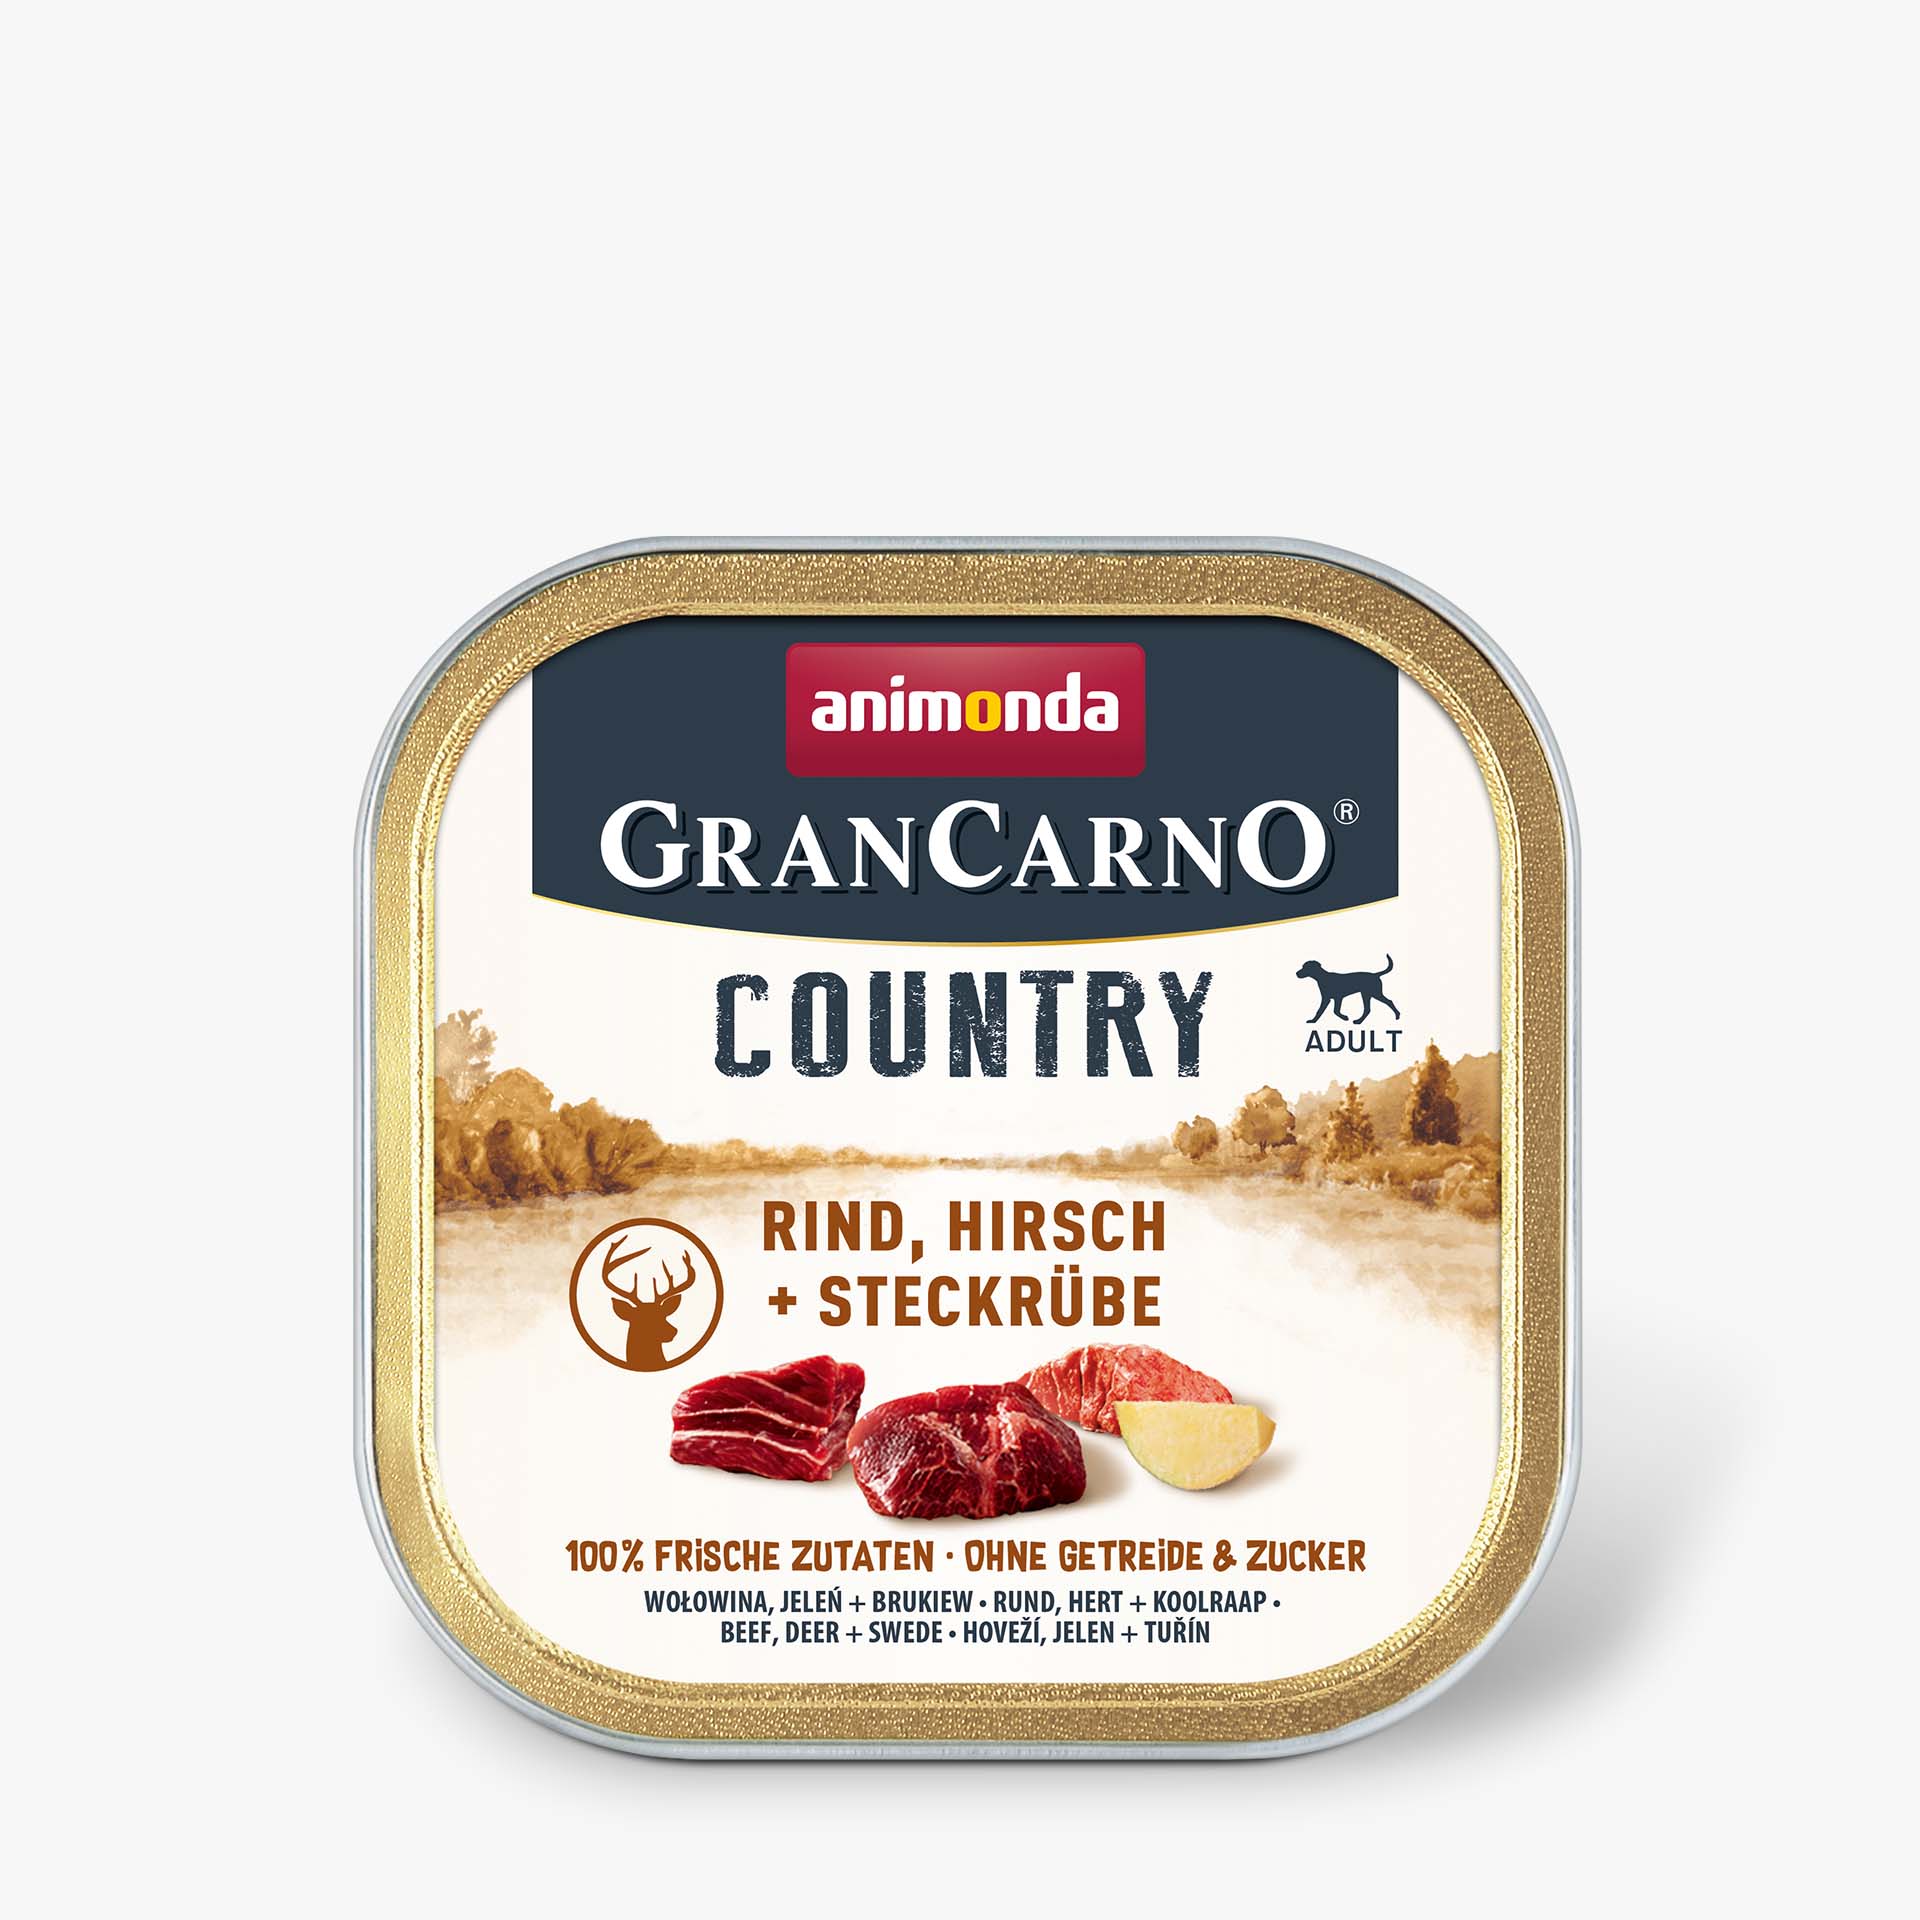 GranCarno Adult Country Rind, Hirsch + Steckrübe